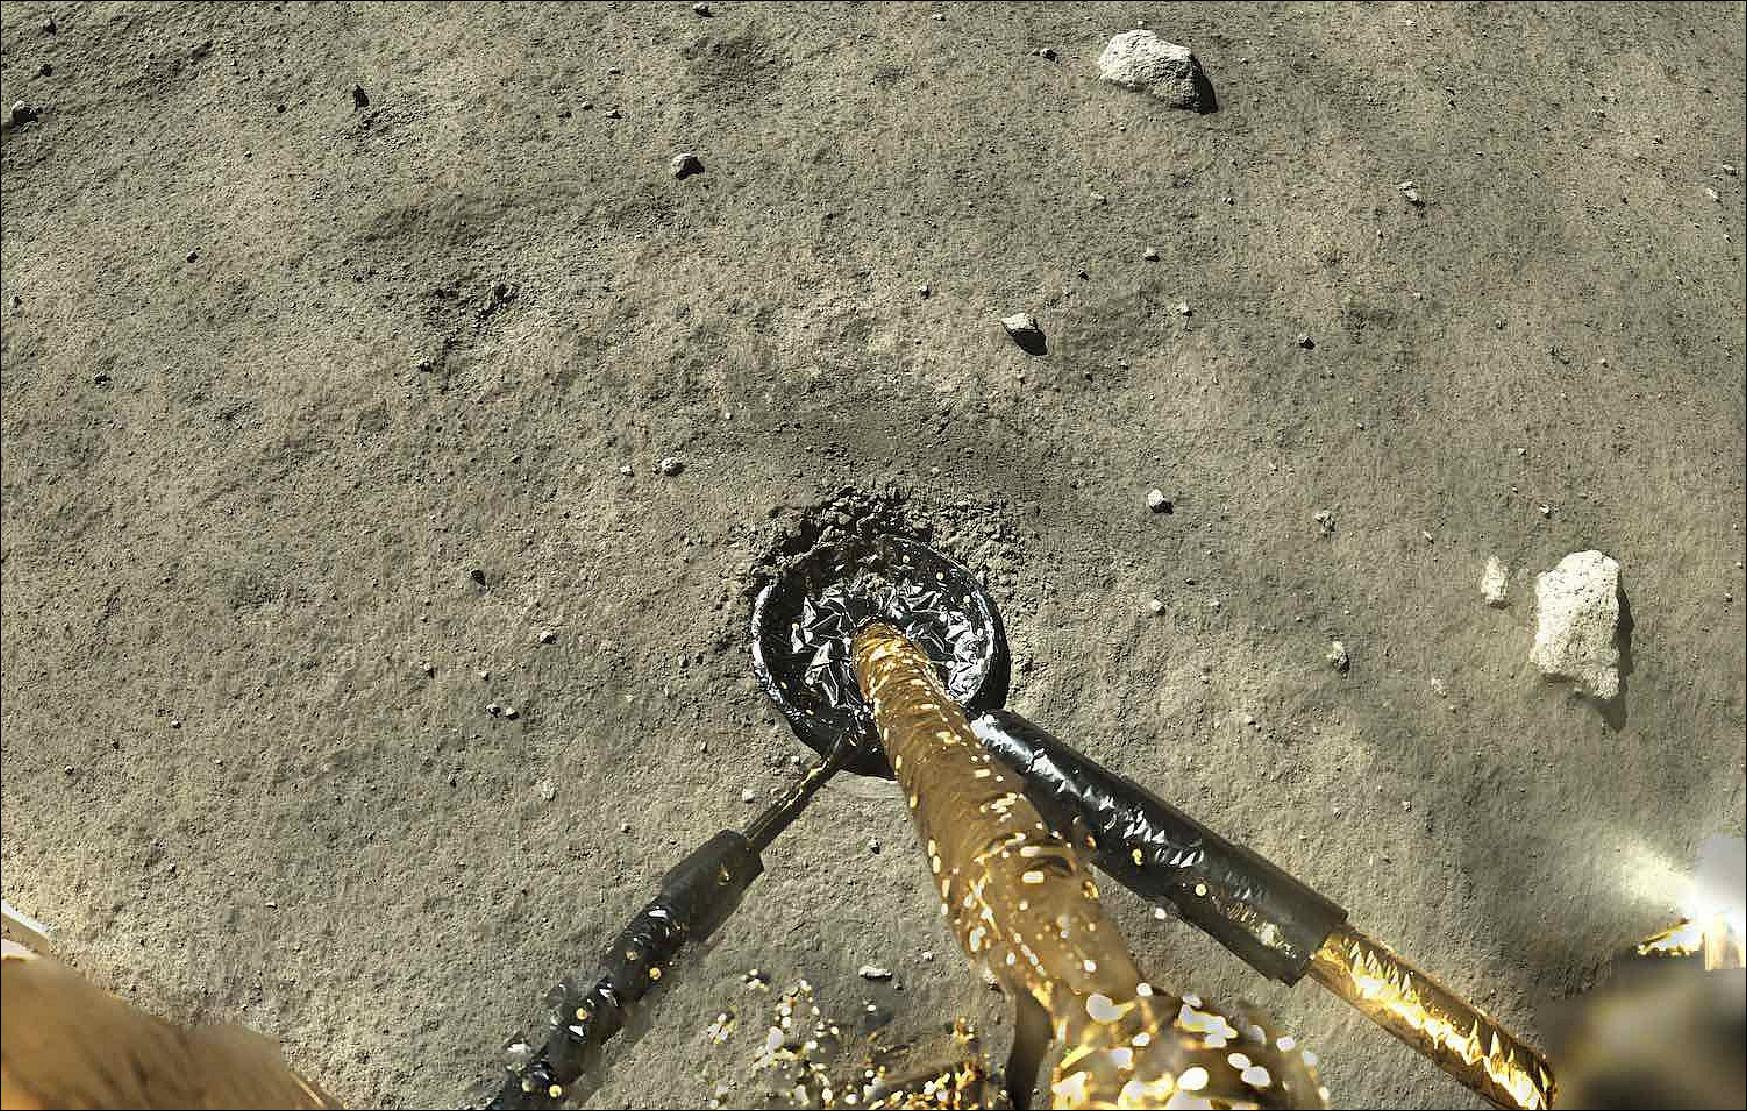 Figure 18: This image from a panorama taken by the Chang’e-5 sample return lander shows one of the spacecraft’s landing legs on the lunar surface (image credit: CNSA)